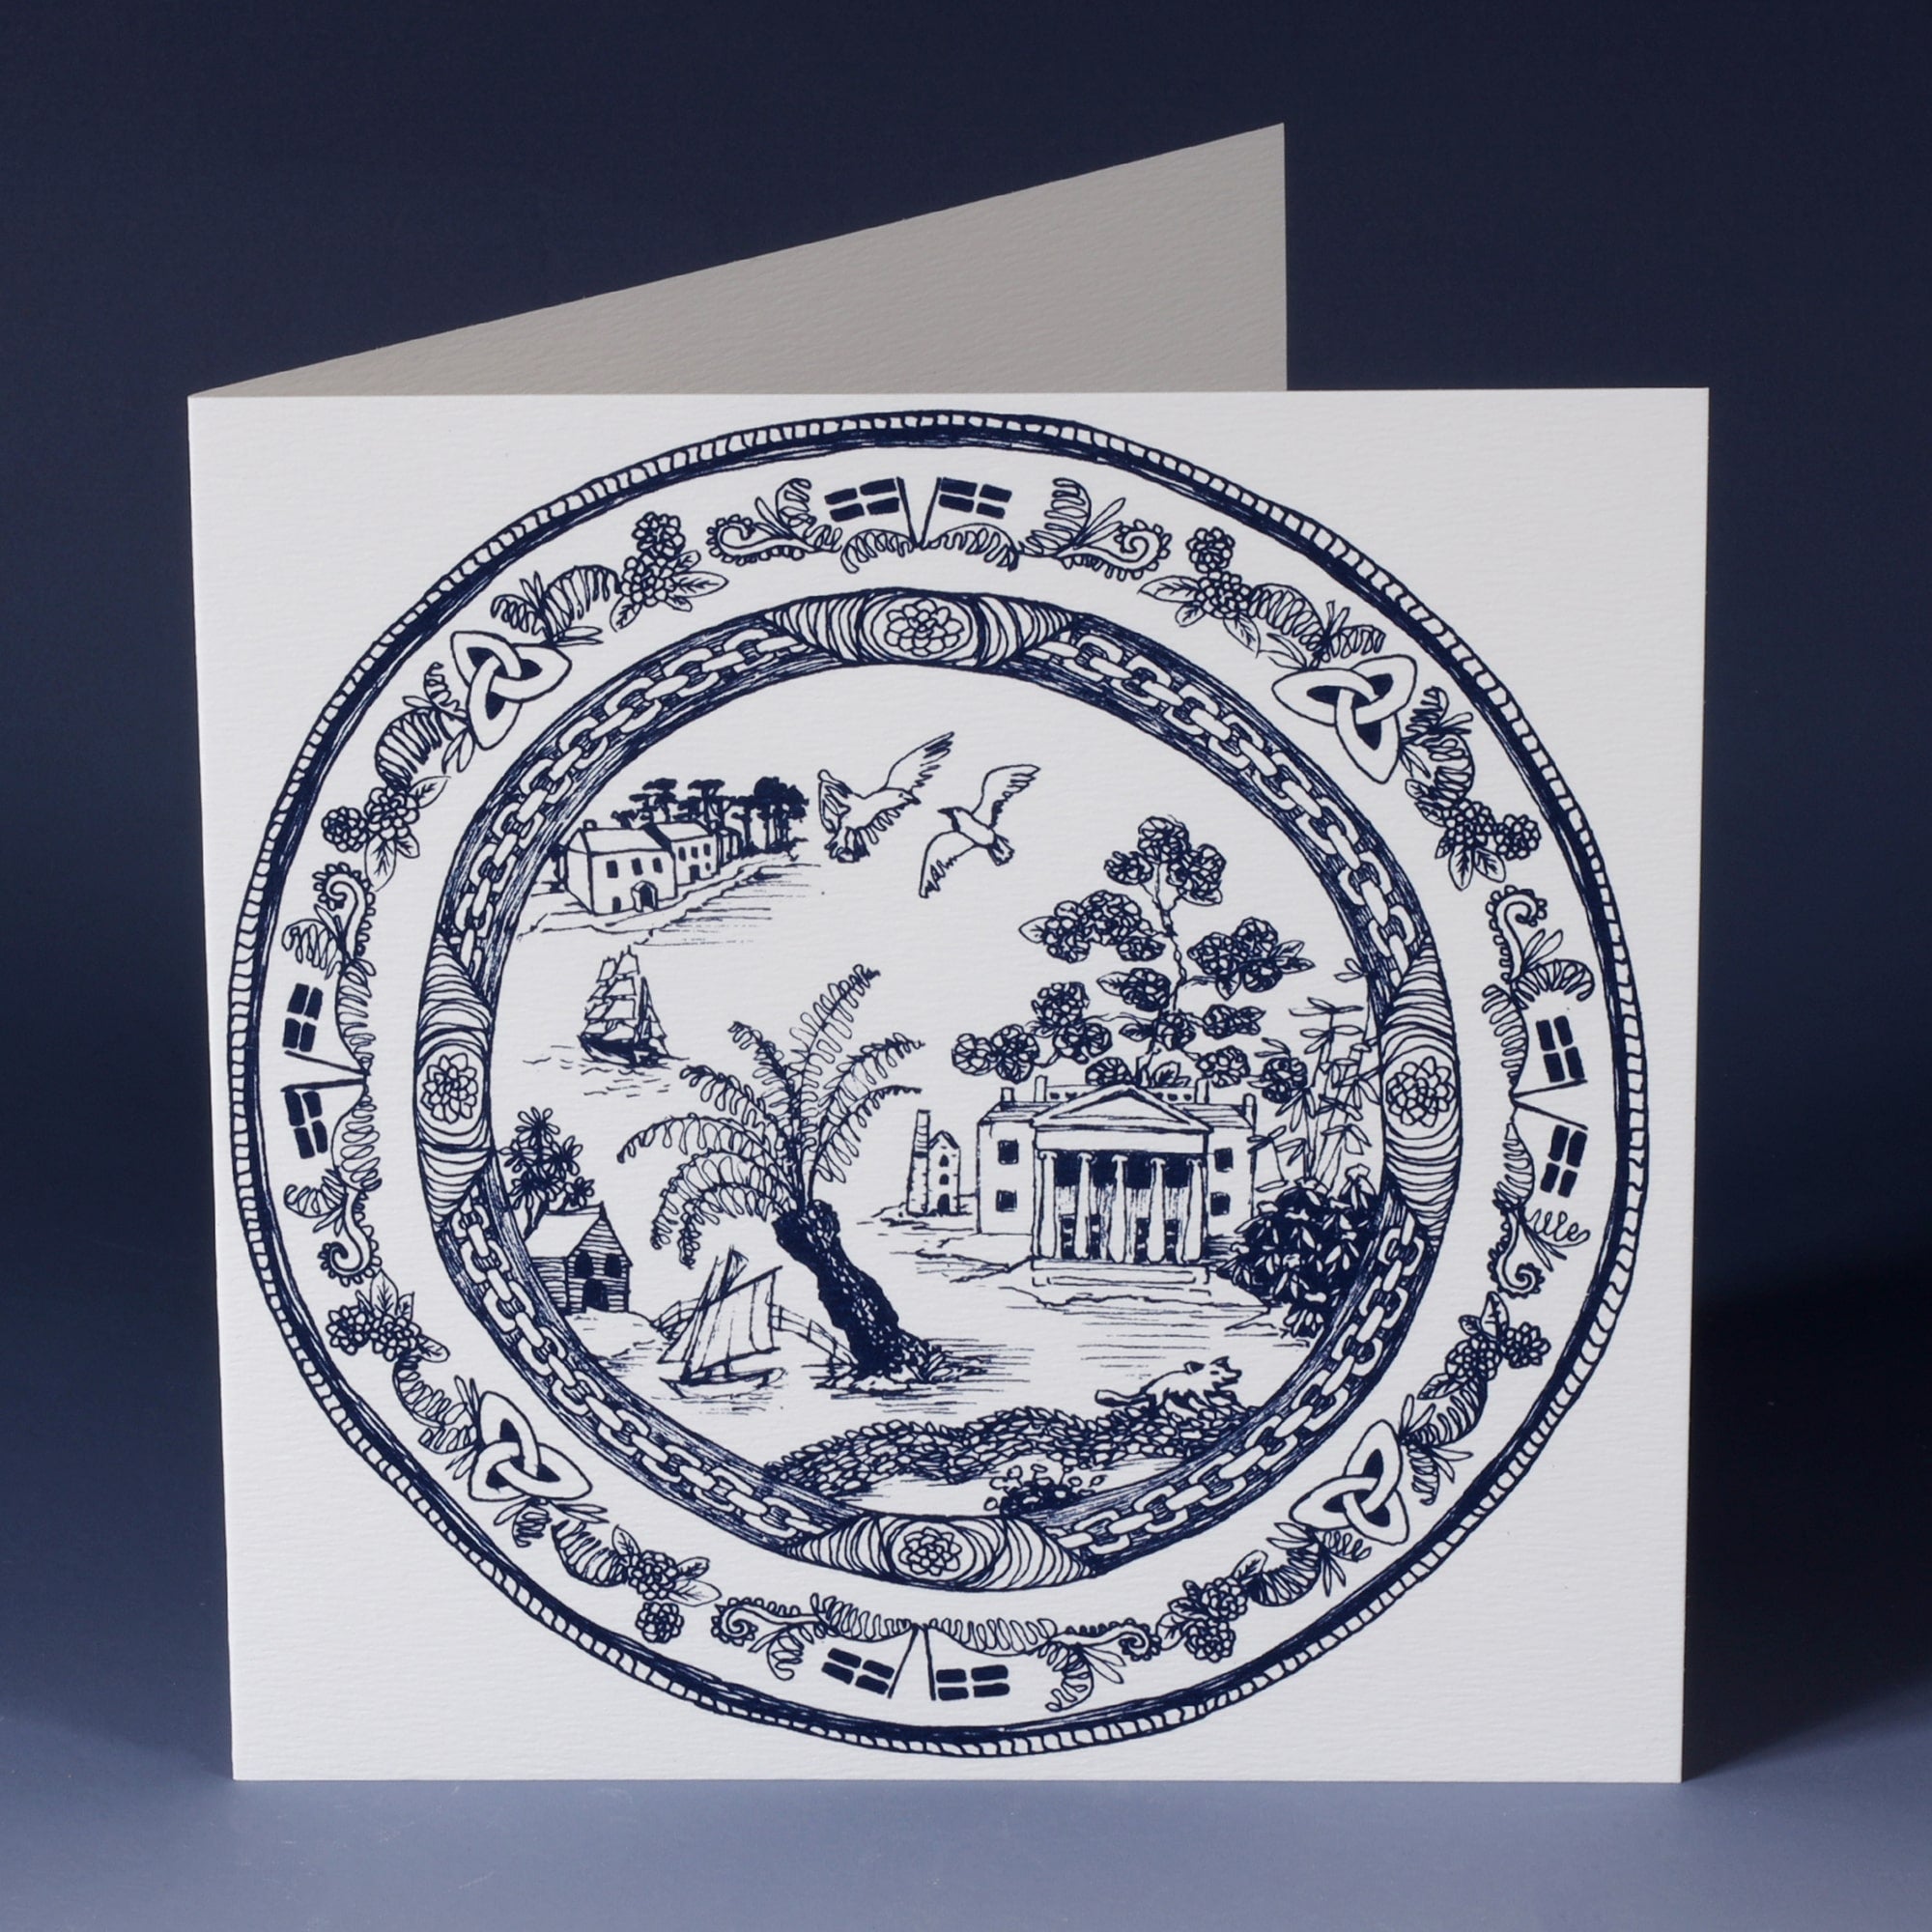 white greeting card with navy illustration of a cornish inspired willow pattern plate, with trelissick gardens, seagulls, tree ferns fishermens cottages and cornish flags 